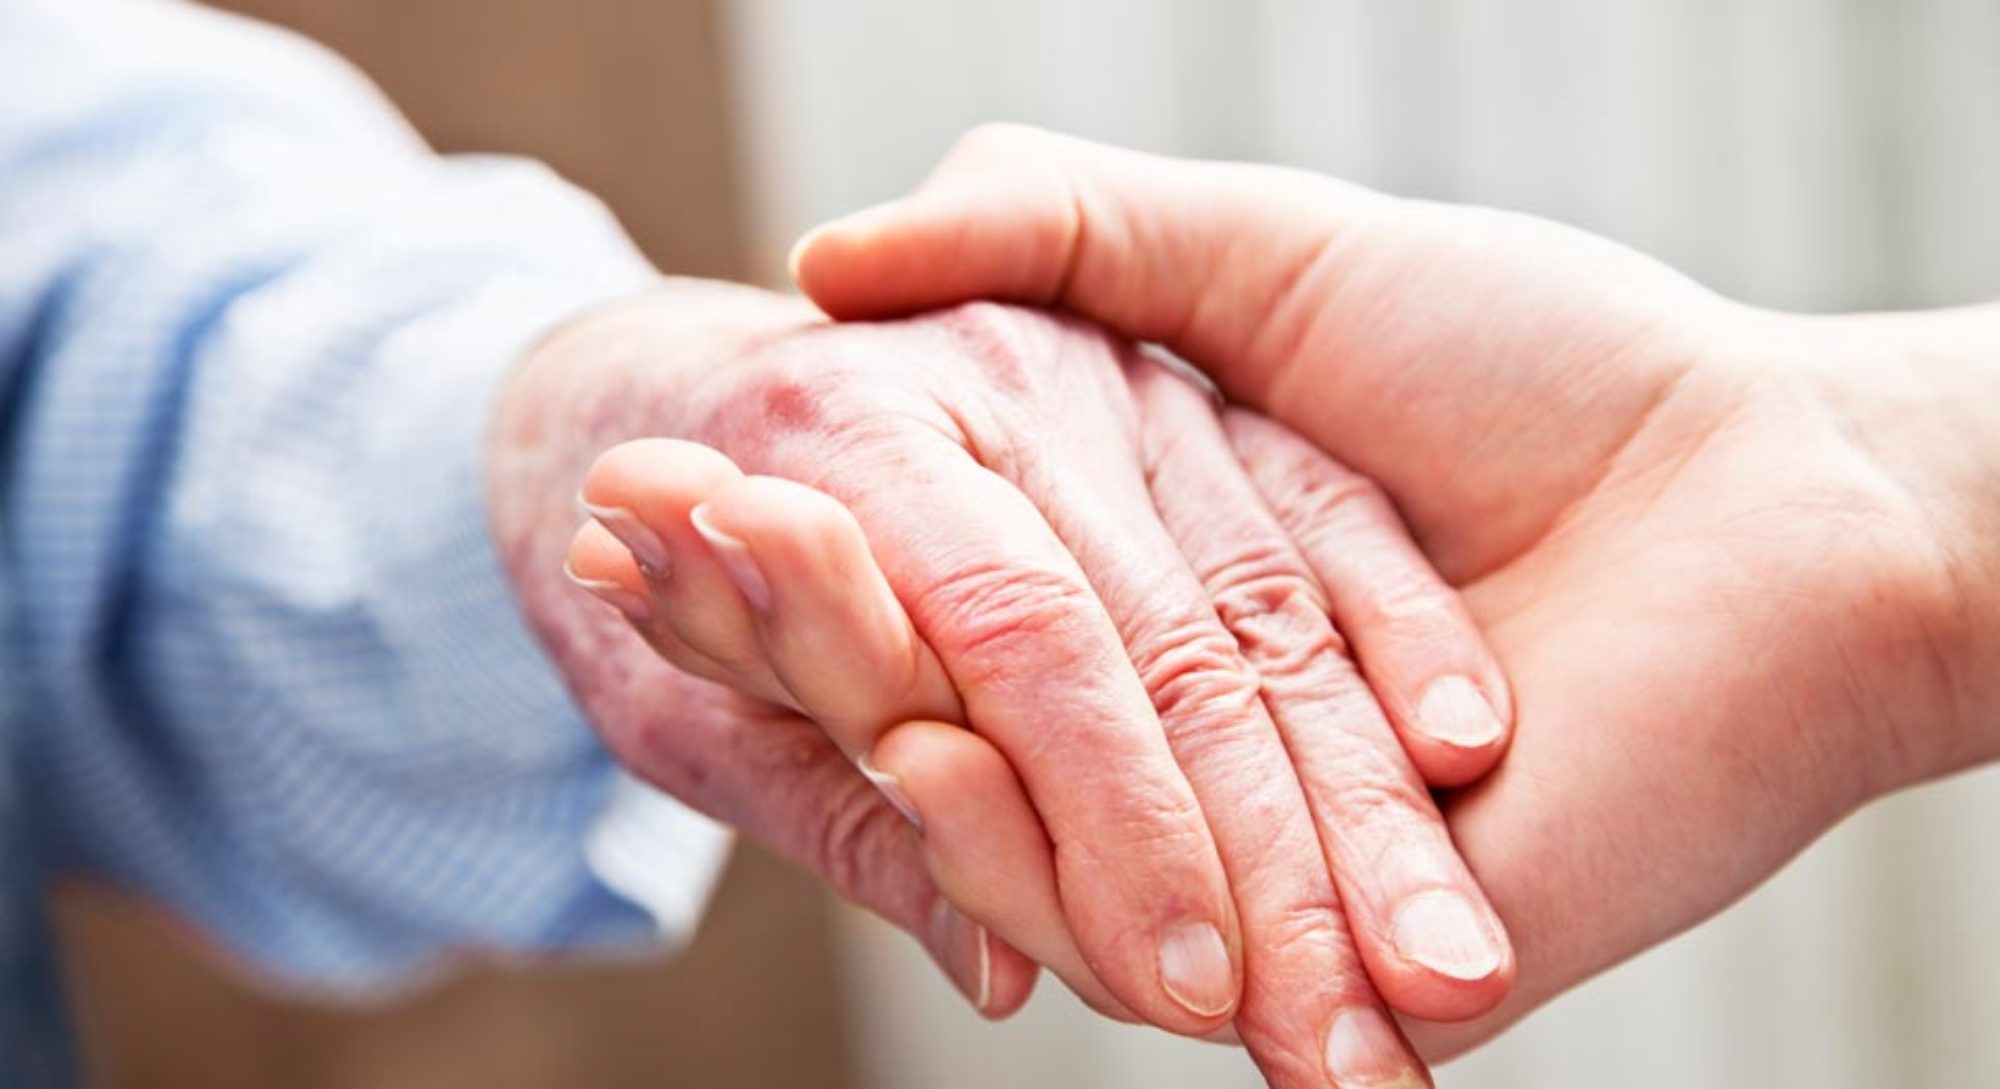 Did You Know that Assisted Living Services are Tax Deductible?